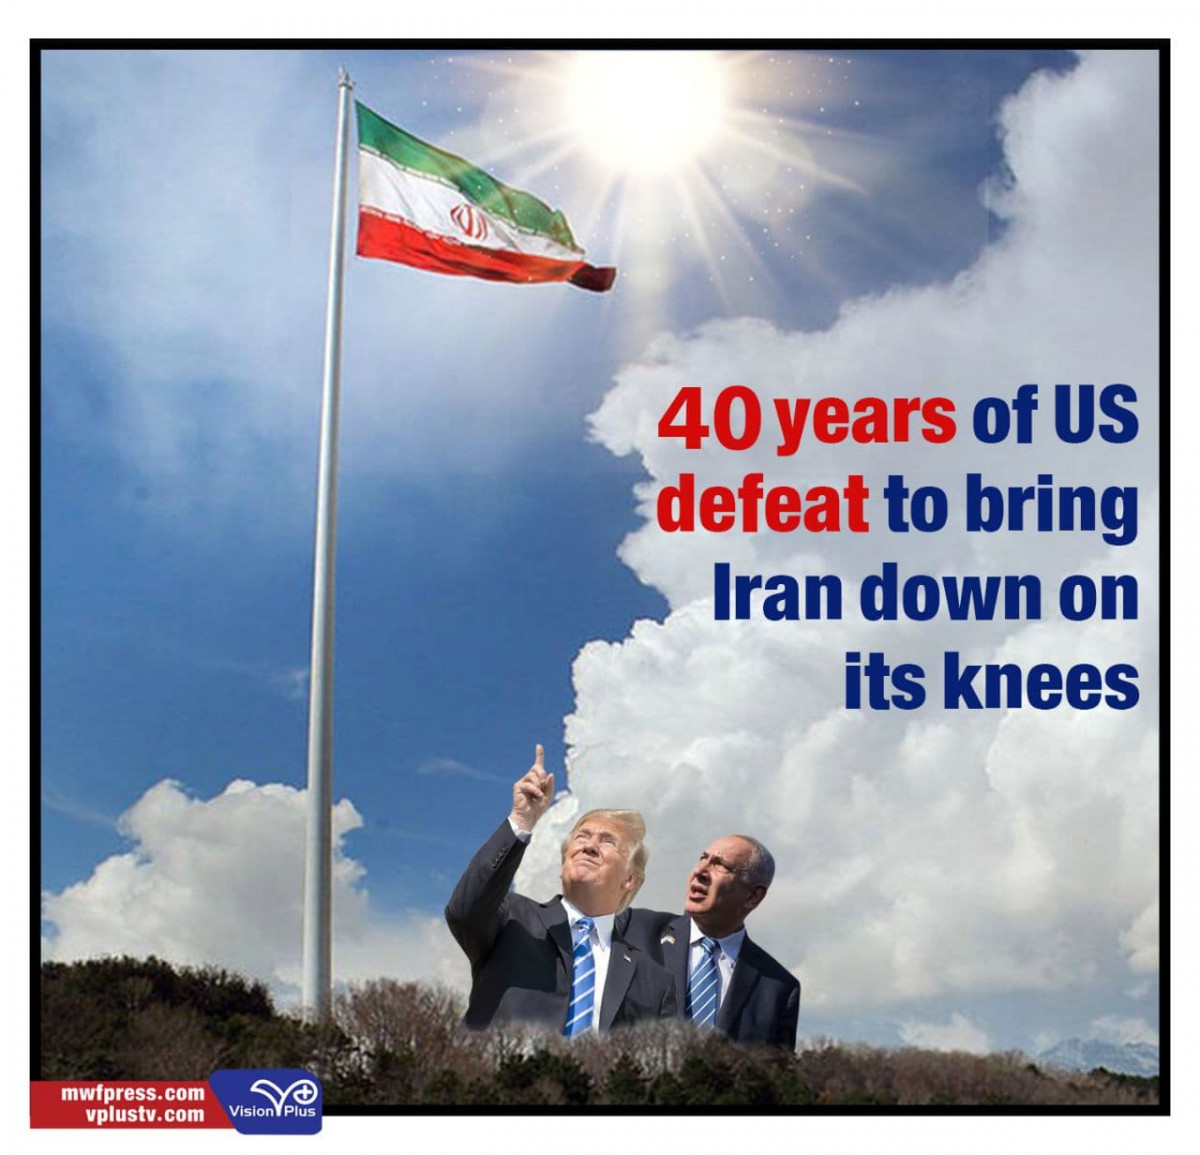 40 years of US defeat to bring Iran down on its knees